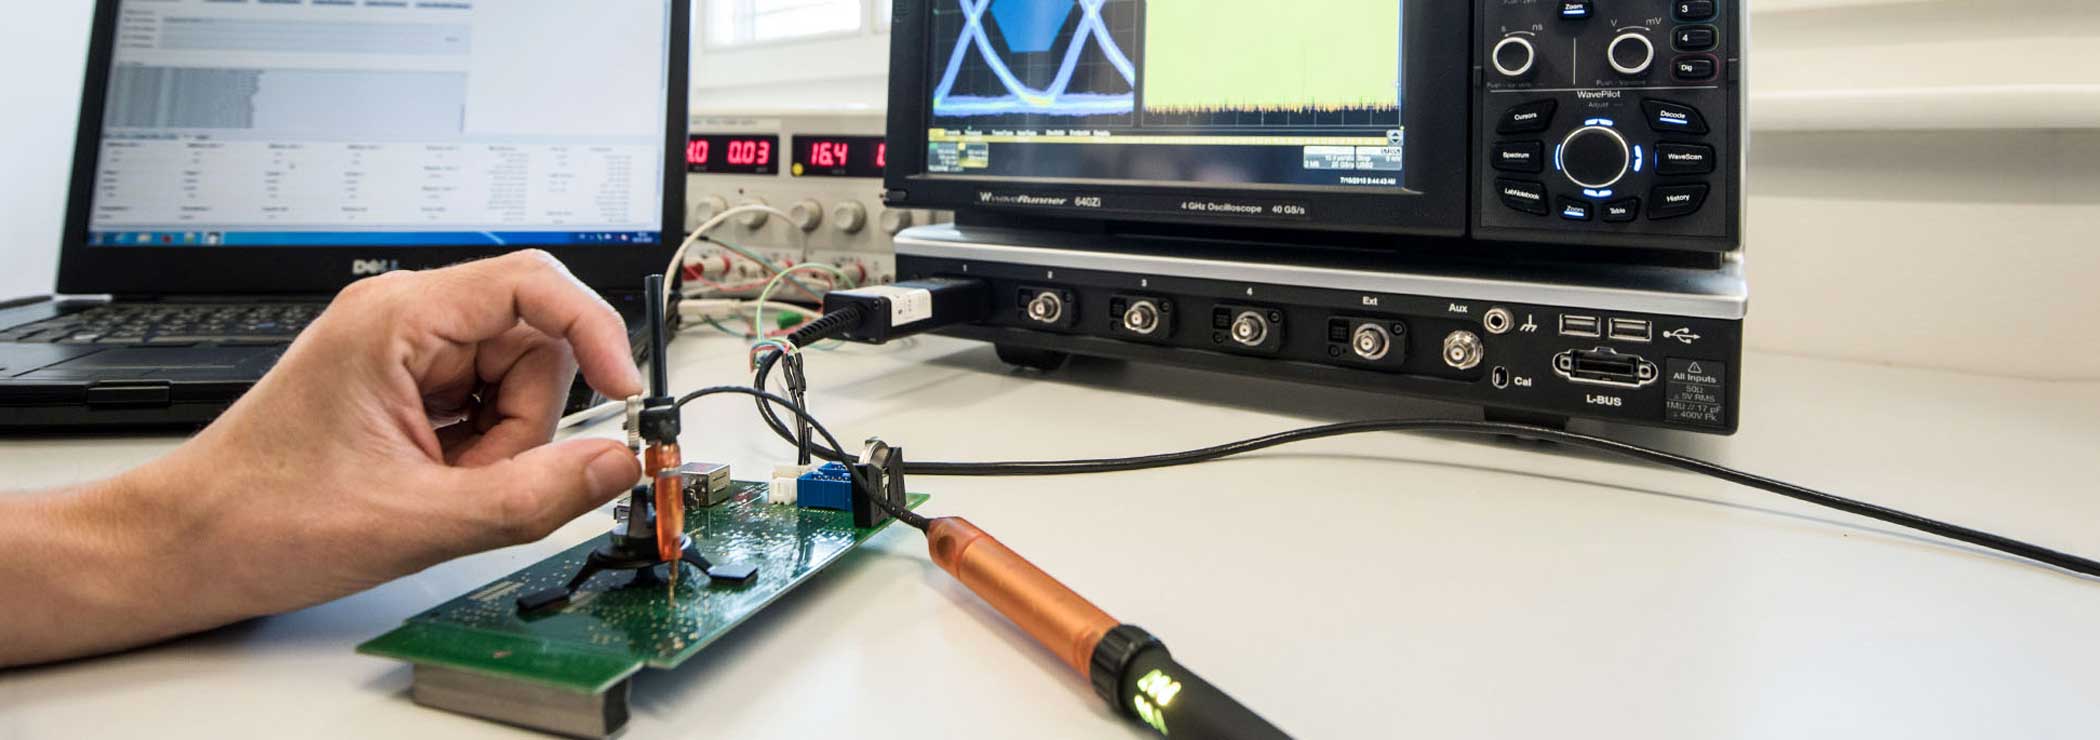 Measurement of USB parameters with high speed oscilloscope